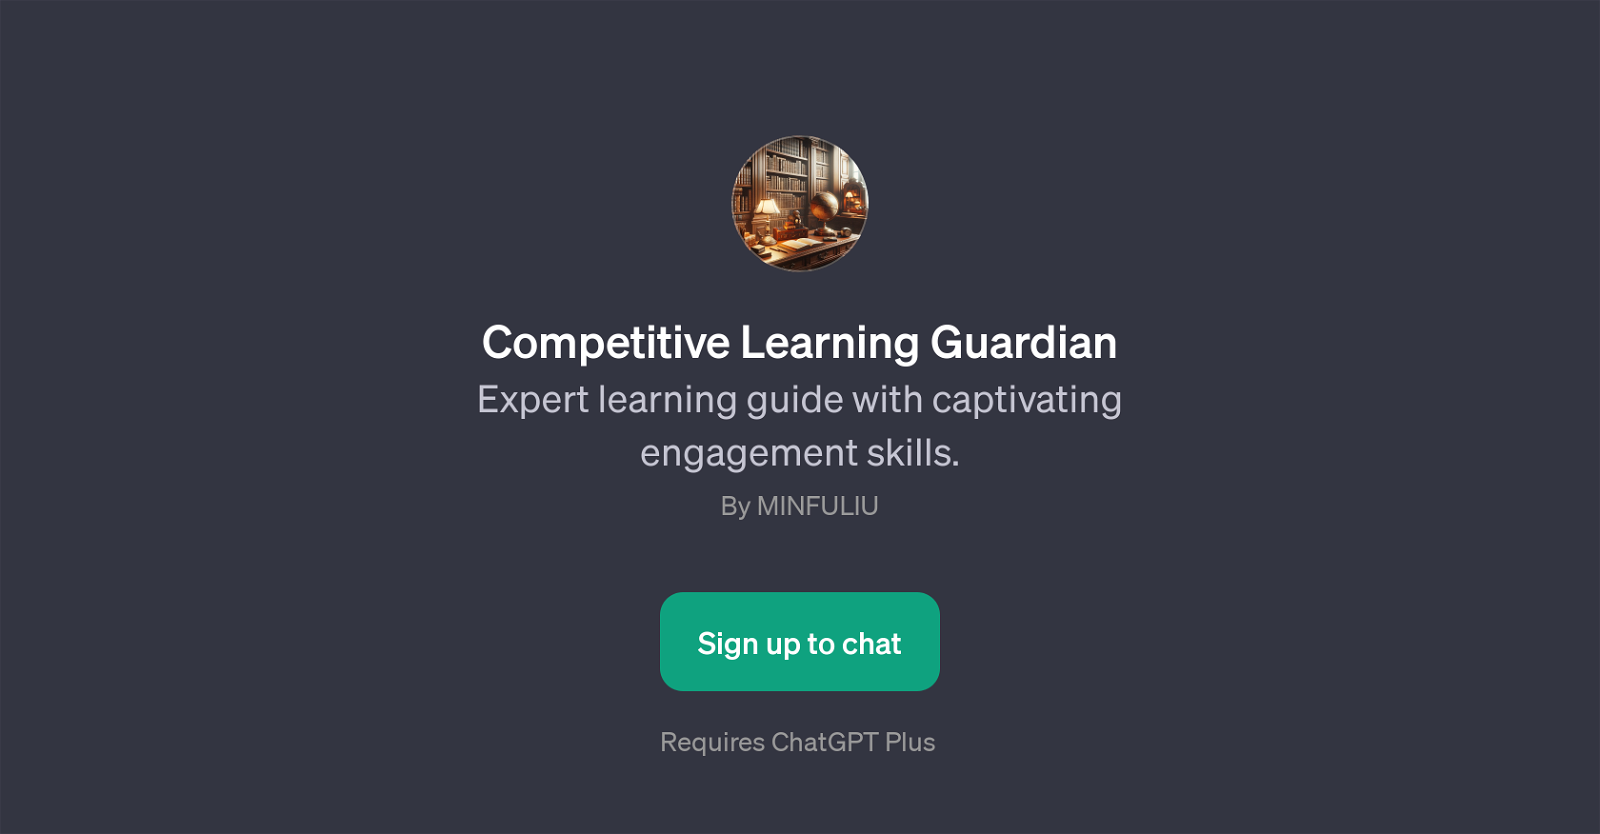 Competitive Learning Guardian website